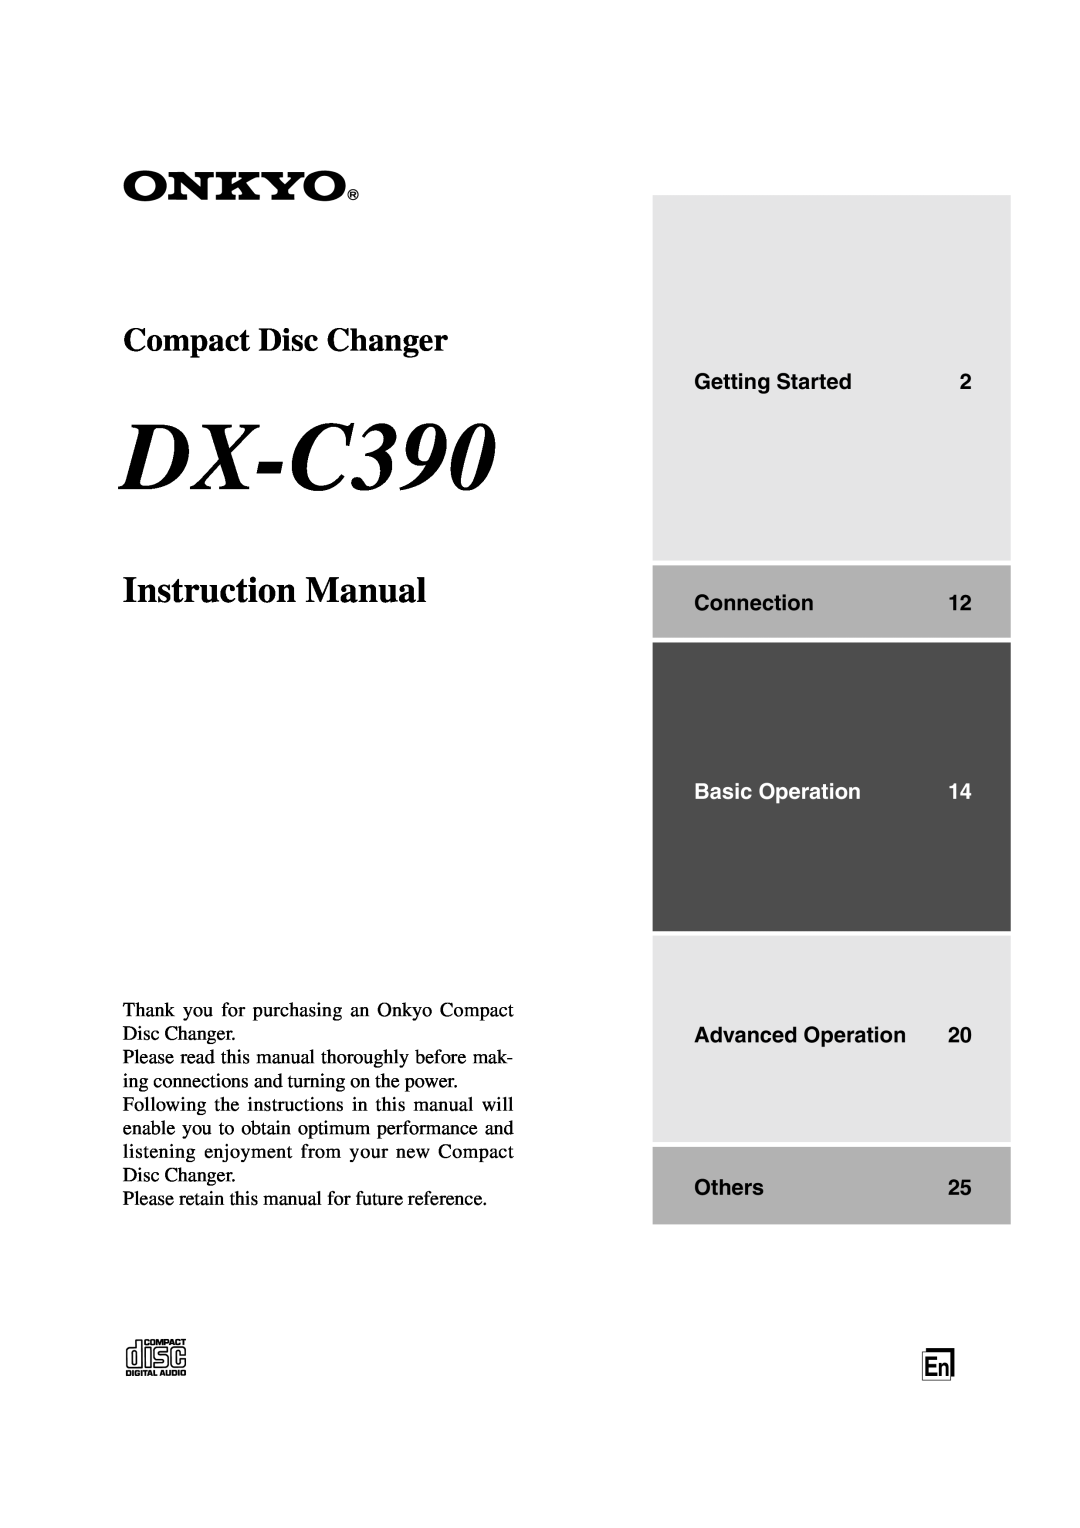 Onkyo DX-C390 instruction manual Getting Started, Connection12, Advanced Operation, Others25, Compact Disc Changer 